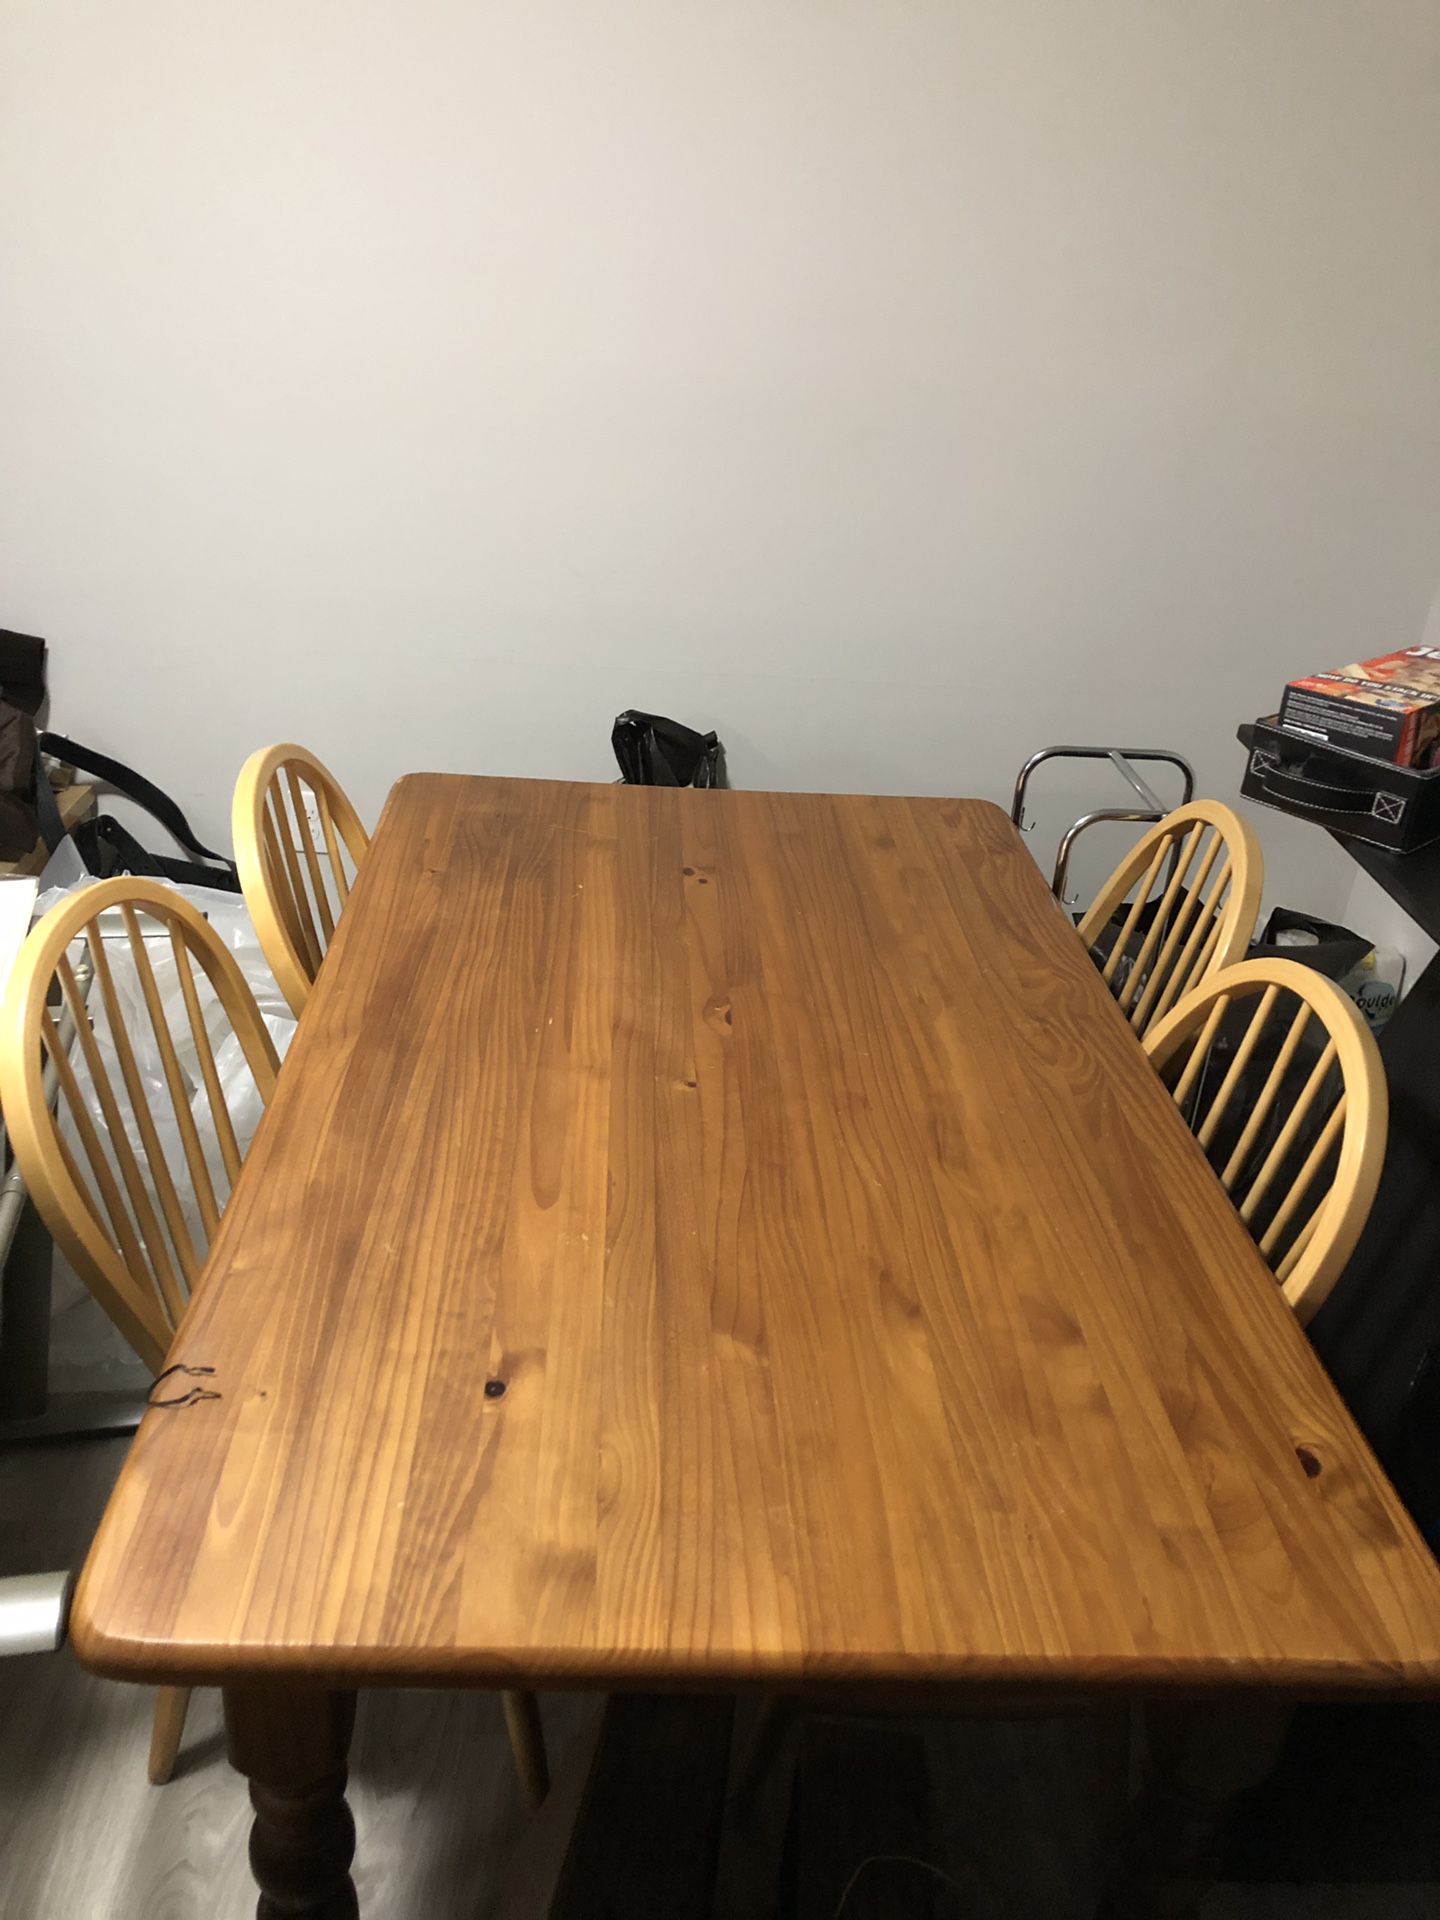 Dining Room / Breakfast Table w/4 chairs